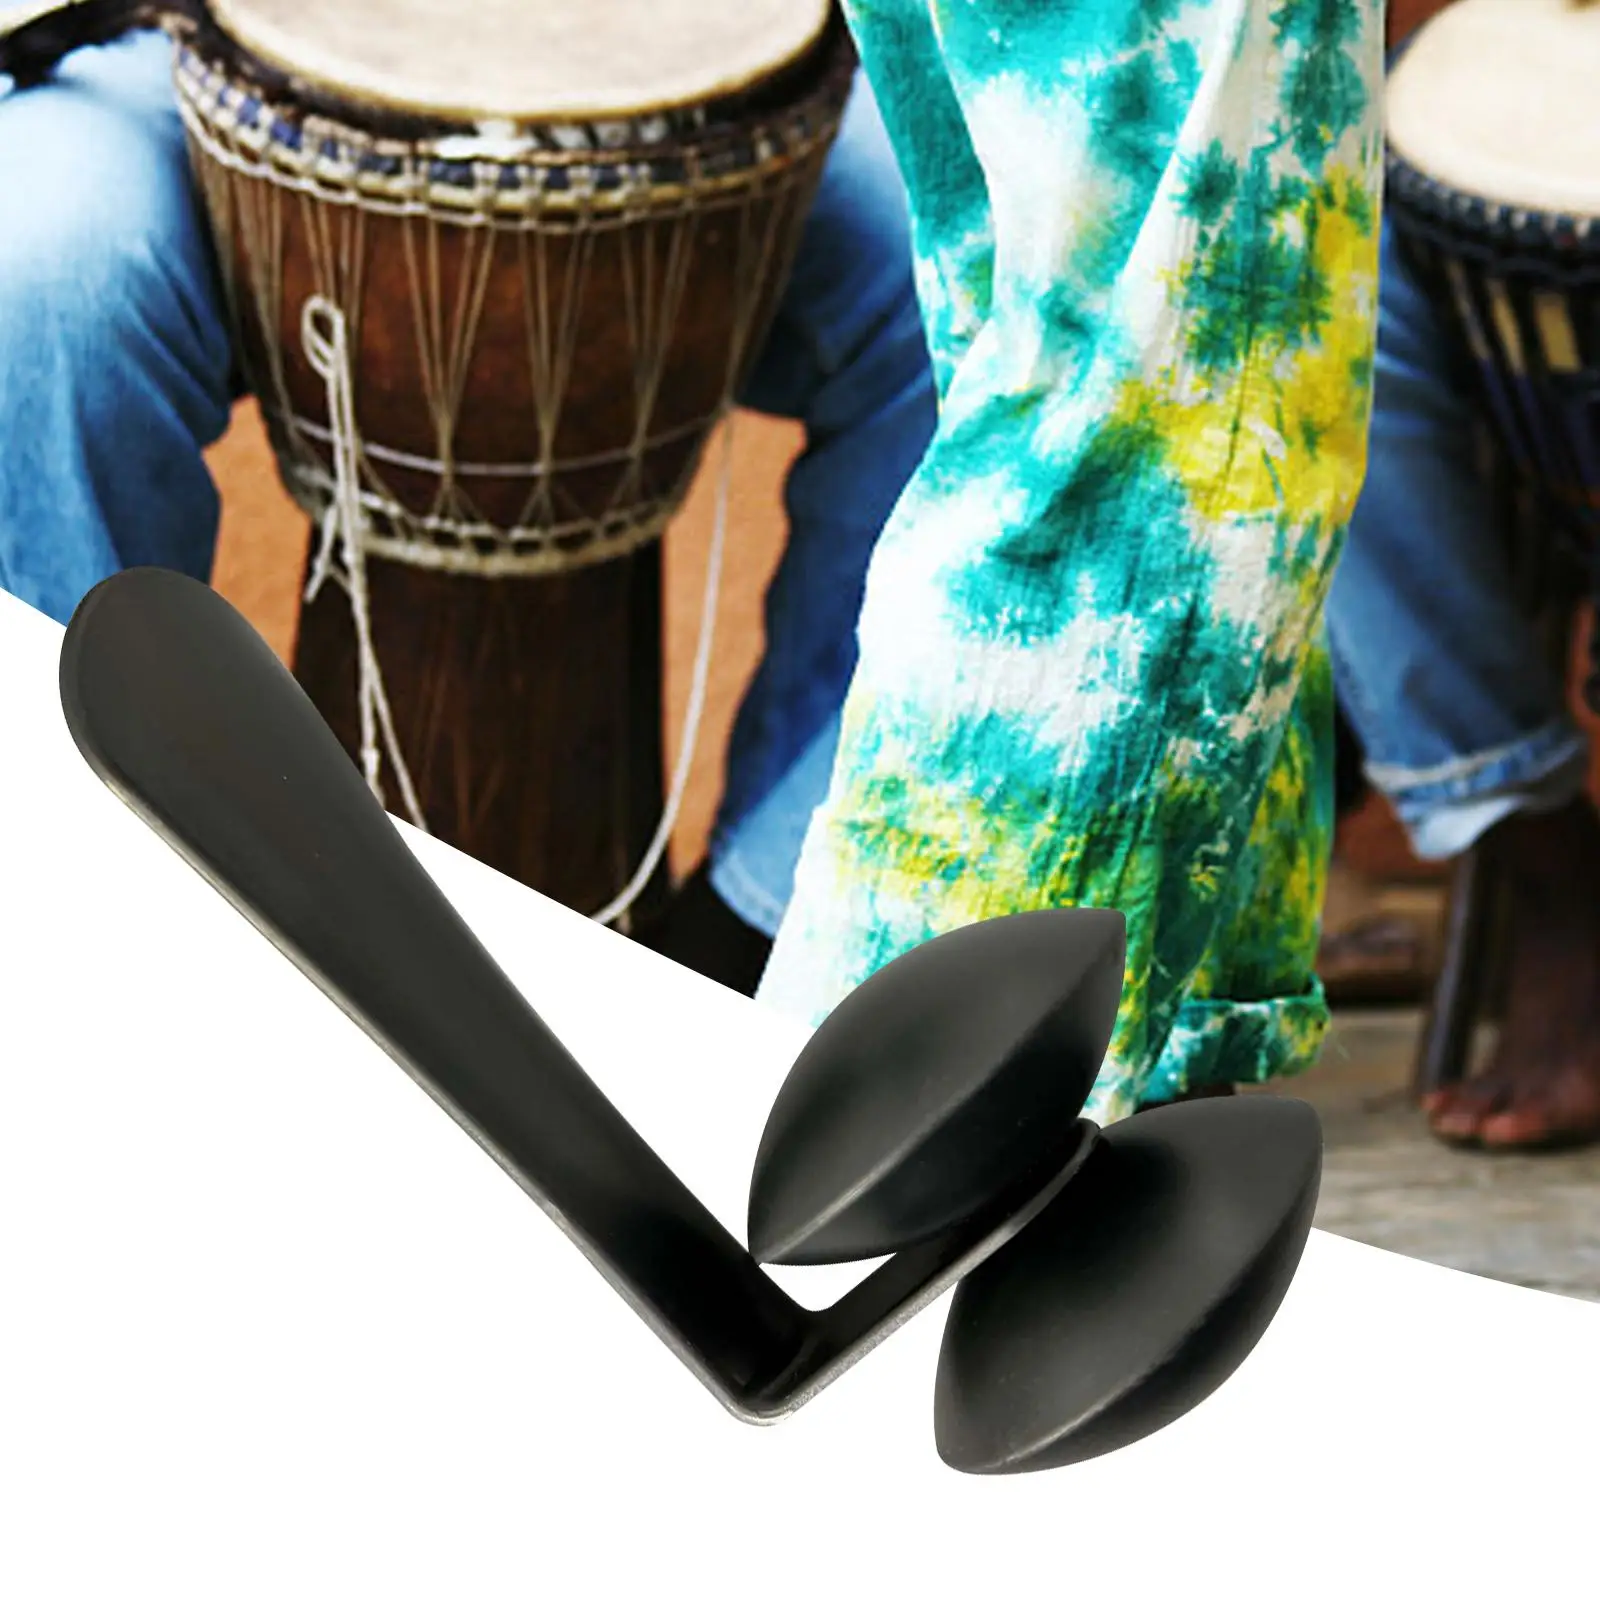 Percussion foot shakers Portable Rhythm Shakers Rattles for Drummers Music Clubs Percussion Ensembles